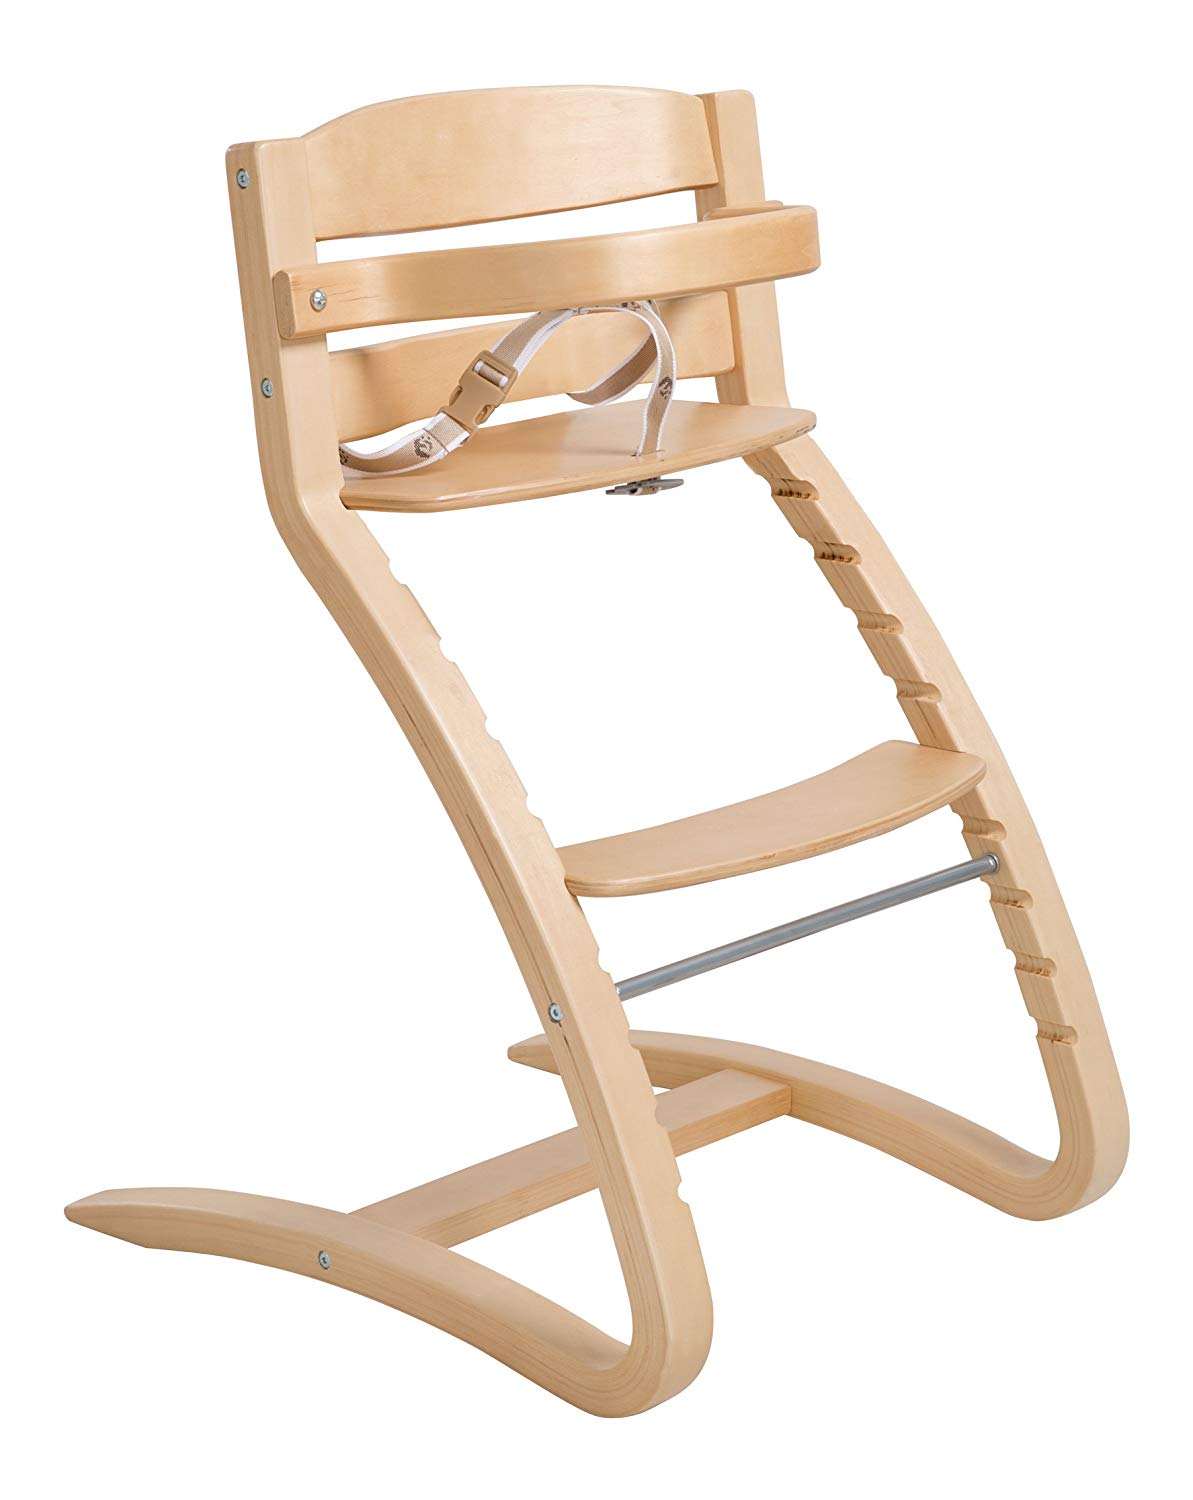 Roba \'Grow Up\' Stair High Chair Modern Wooden High Chair Grows with Your Child from Baby High Chair to Youth Chair, Wood, Natural